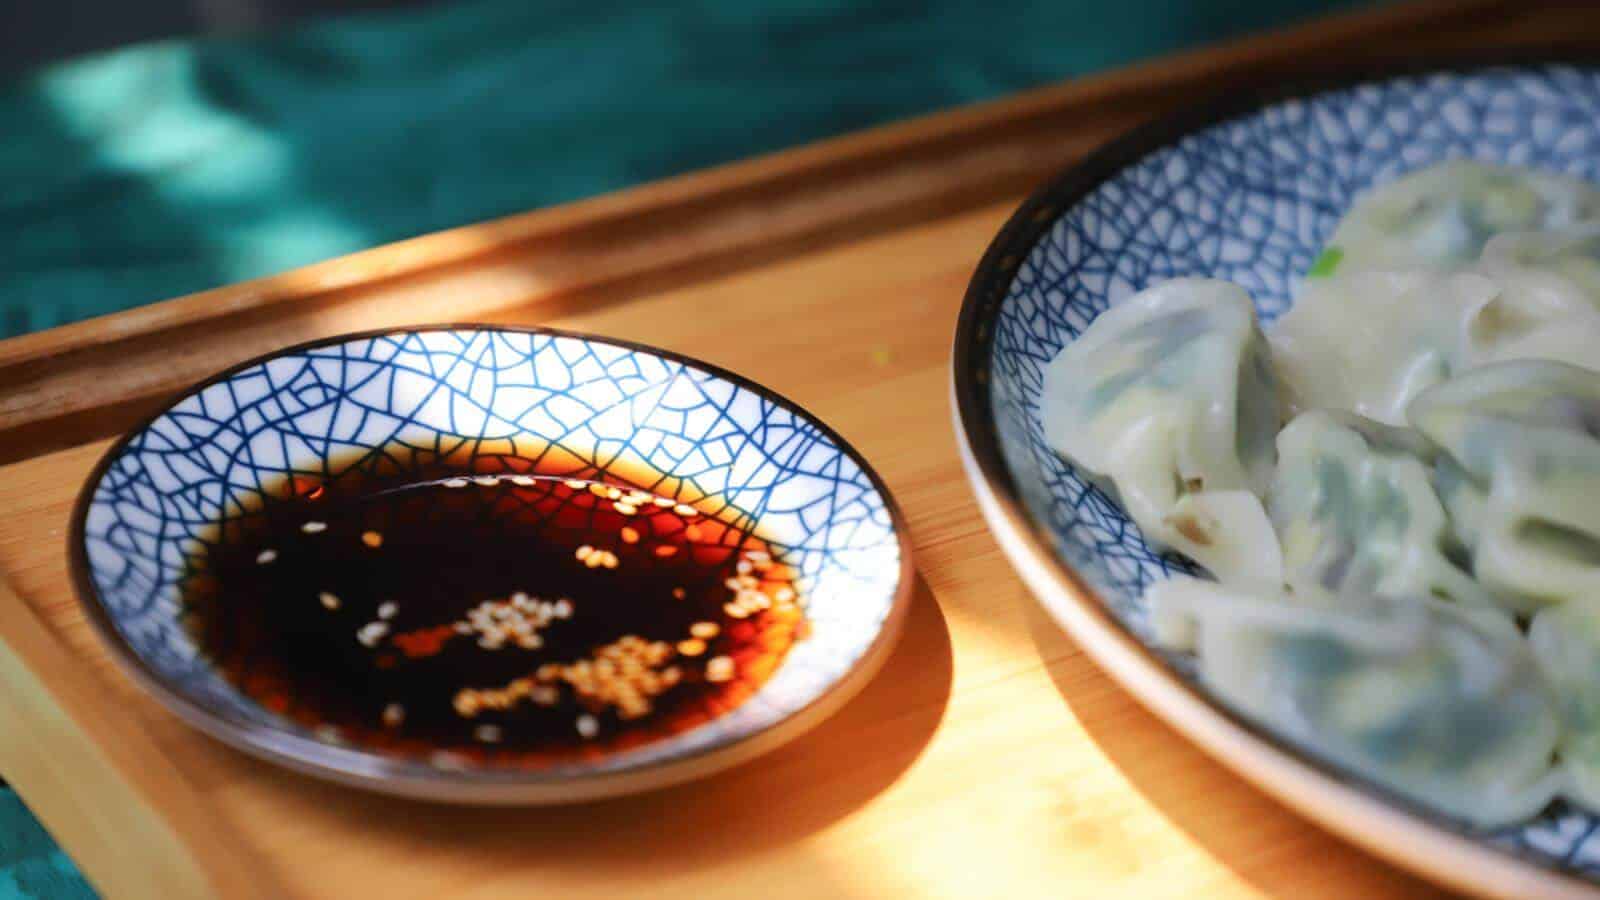 A small saucer full of soy sauce.